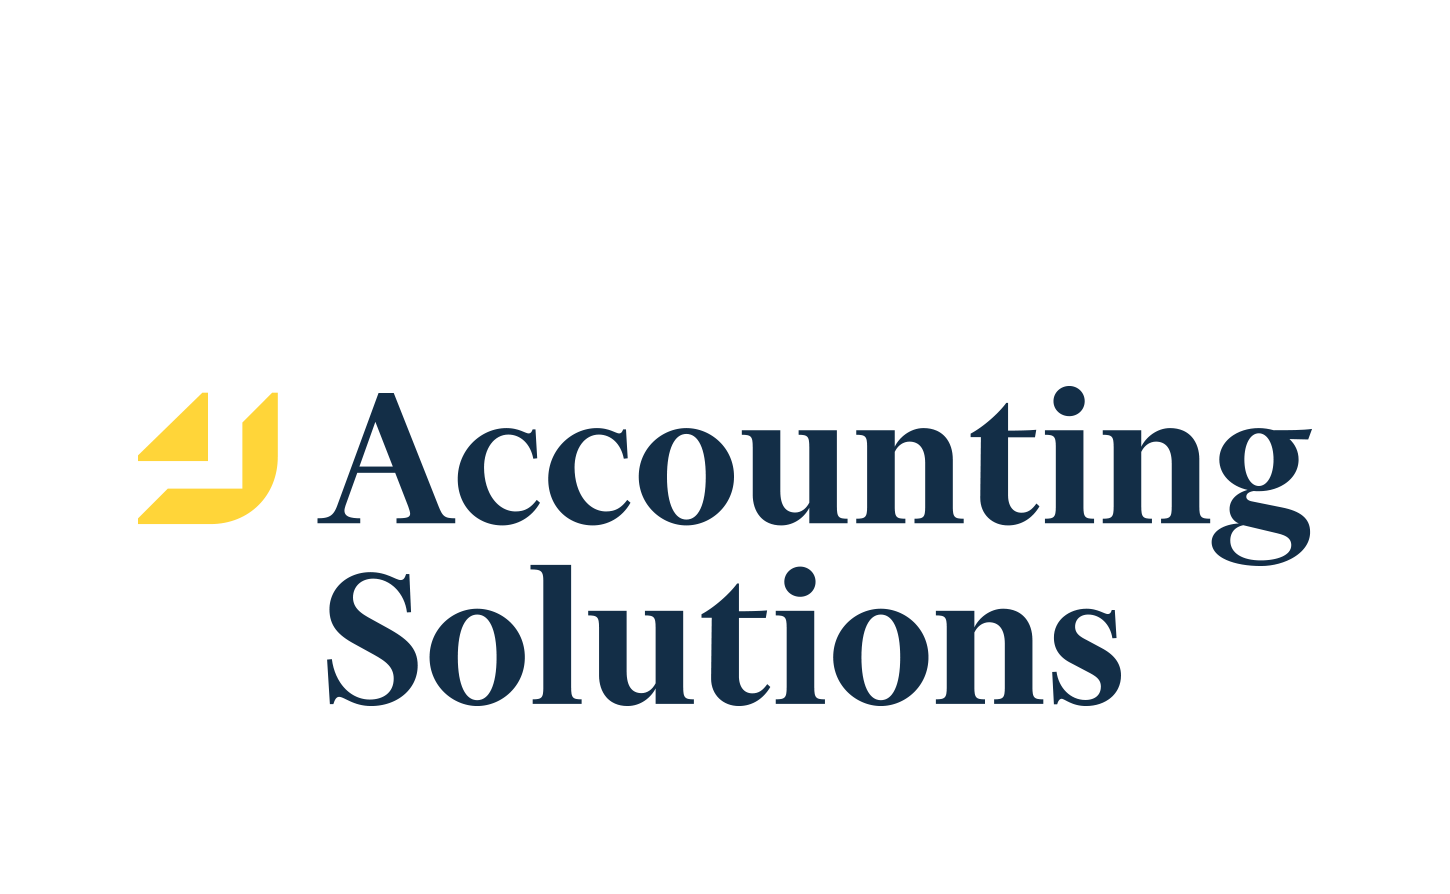 ACCOUNTING SOLUTIONS